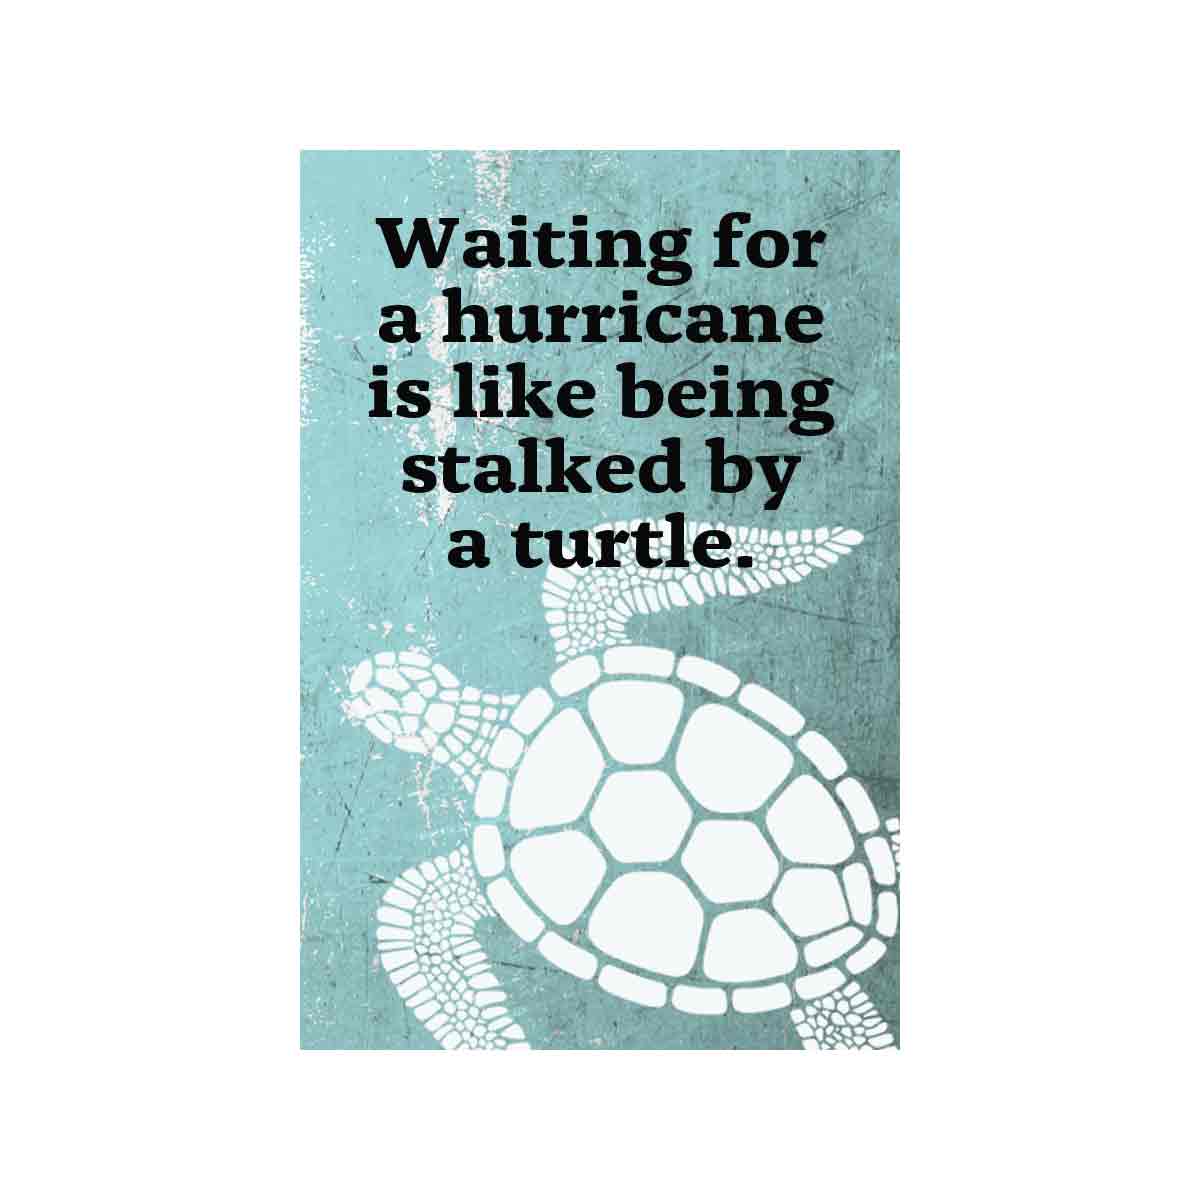 Waiting for a hurricane - Turtle